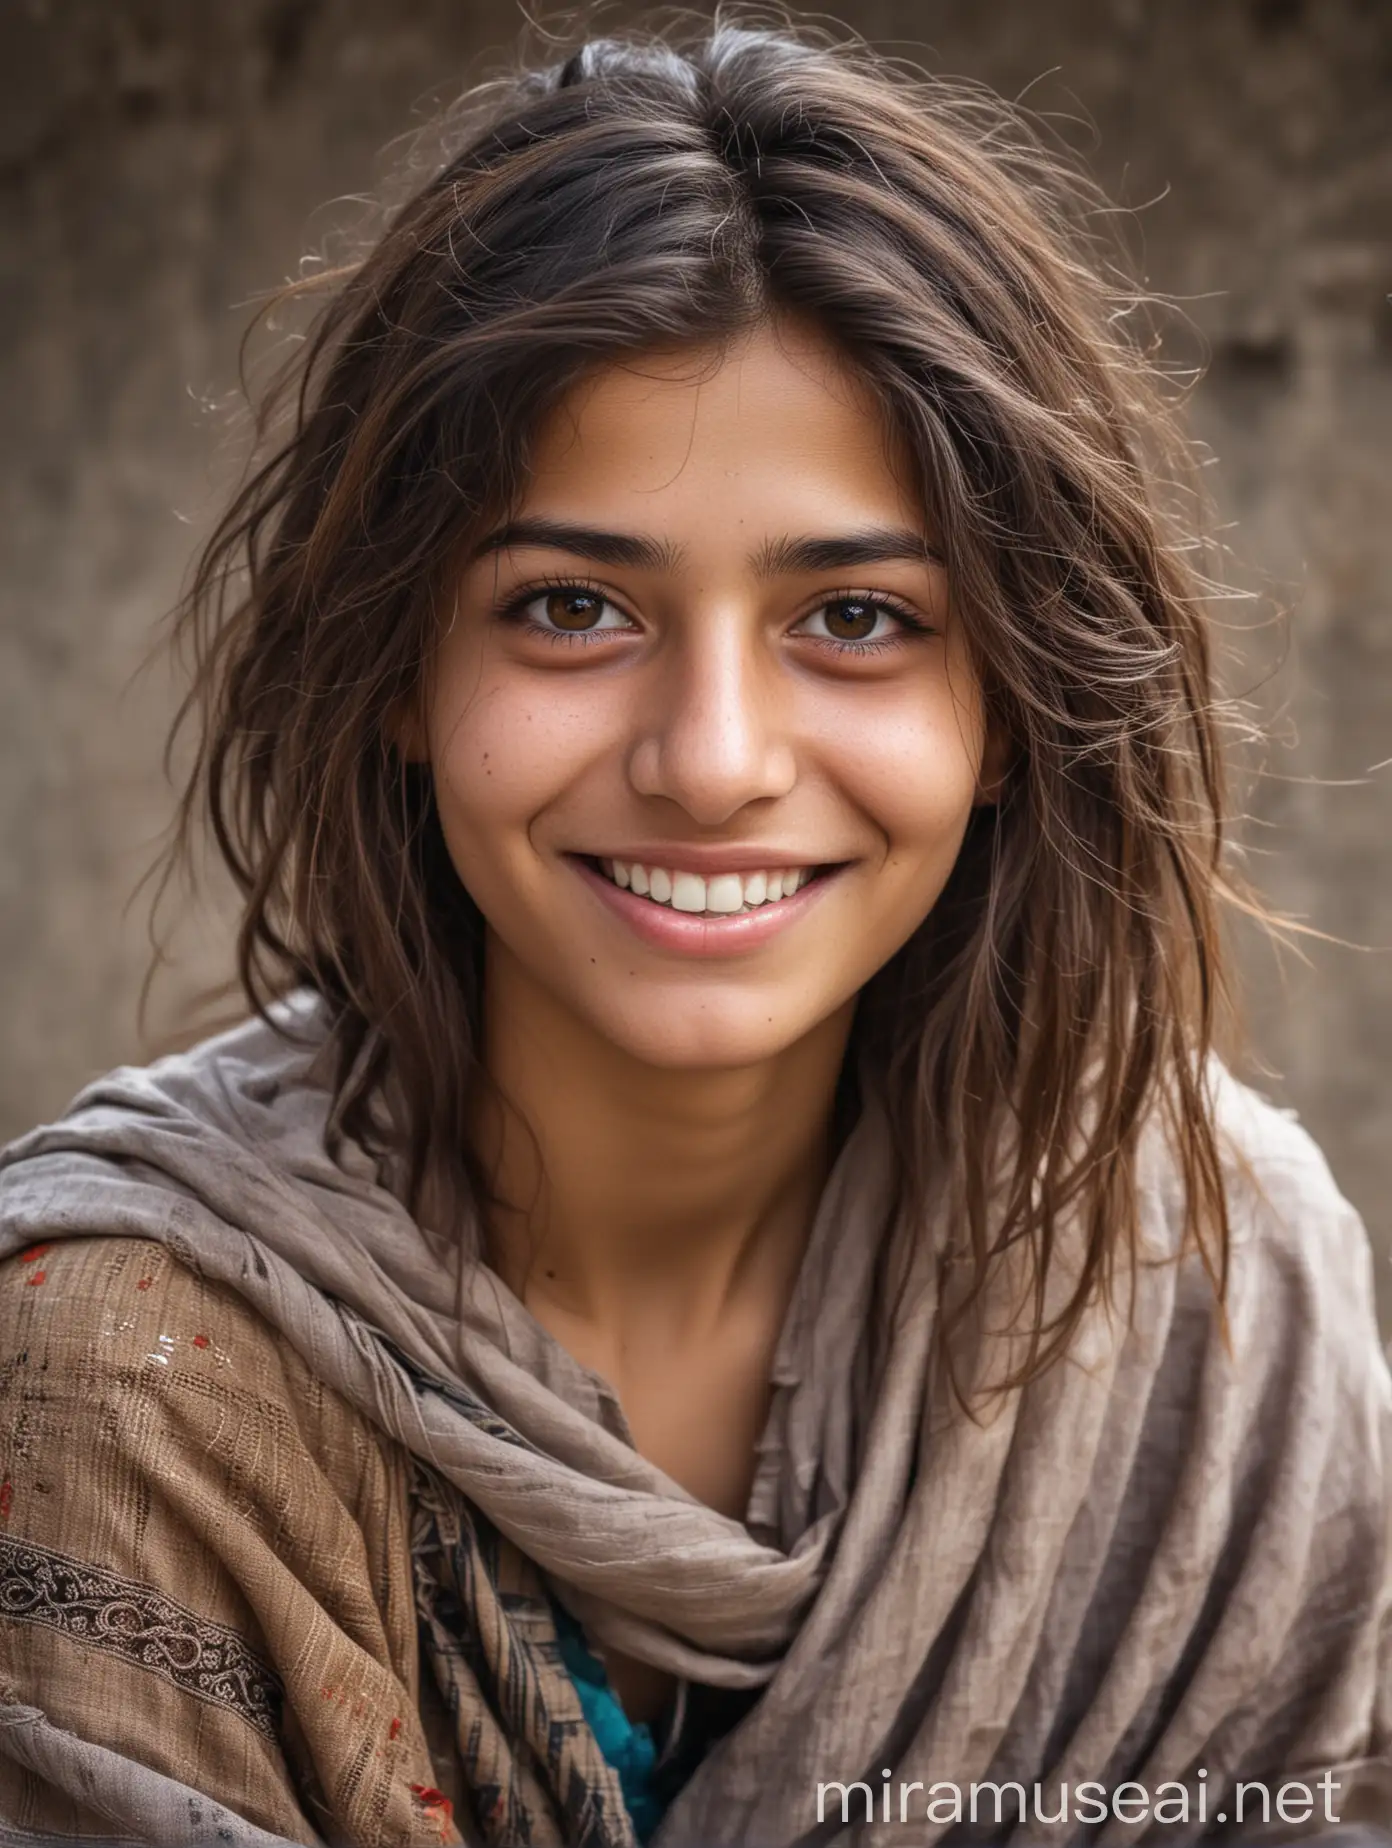 Portrait of a Smiling Pakistani Beggar Girl with Beautiful Features